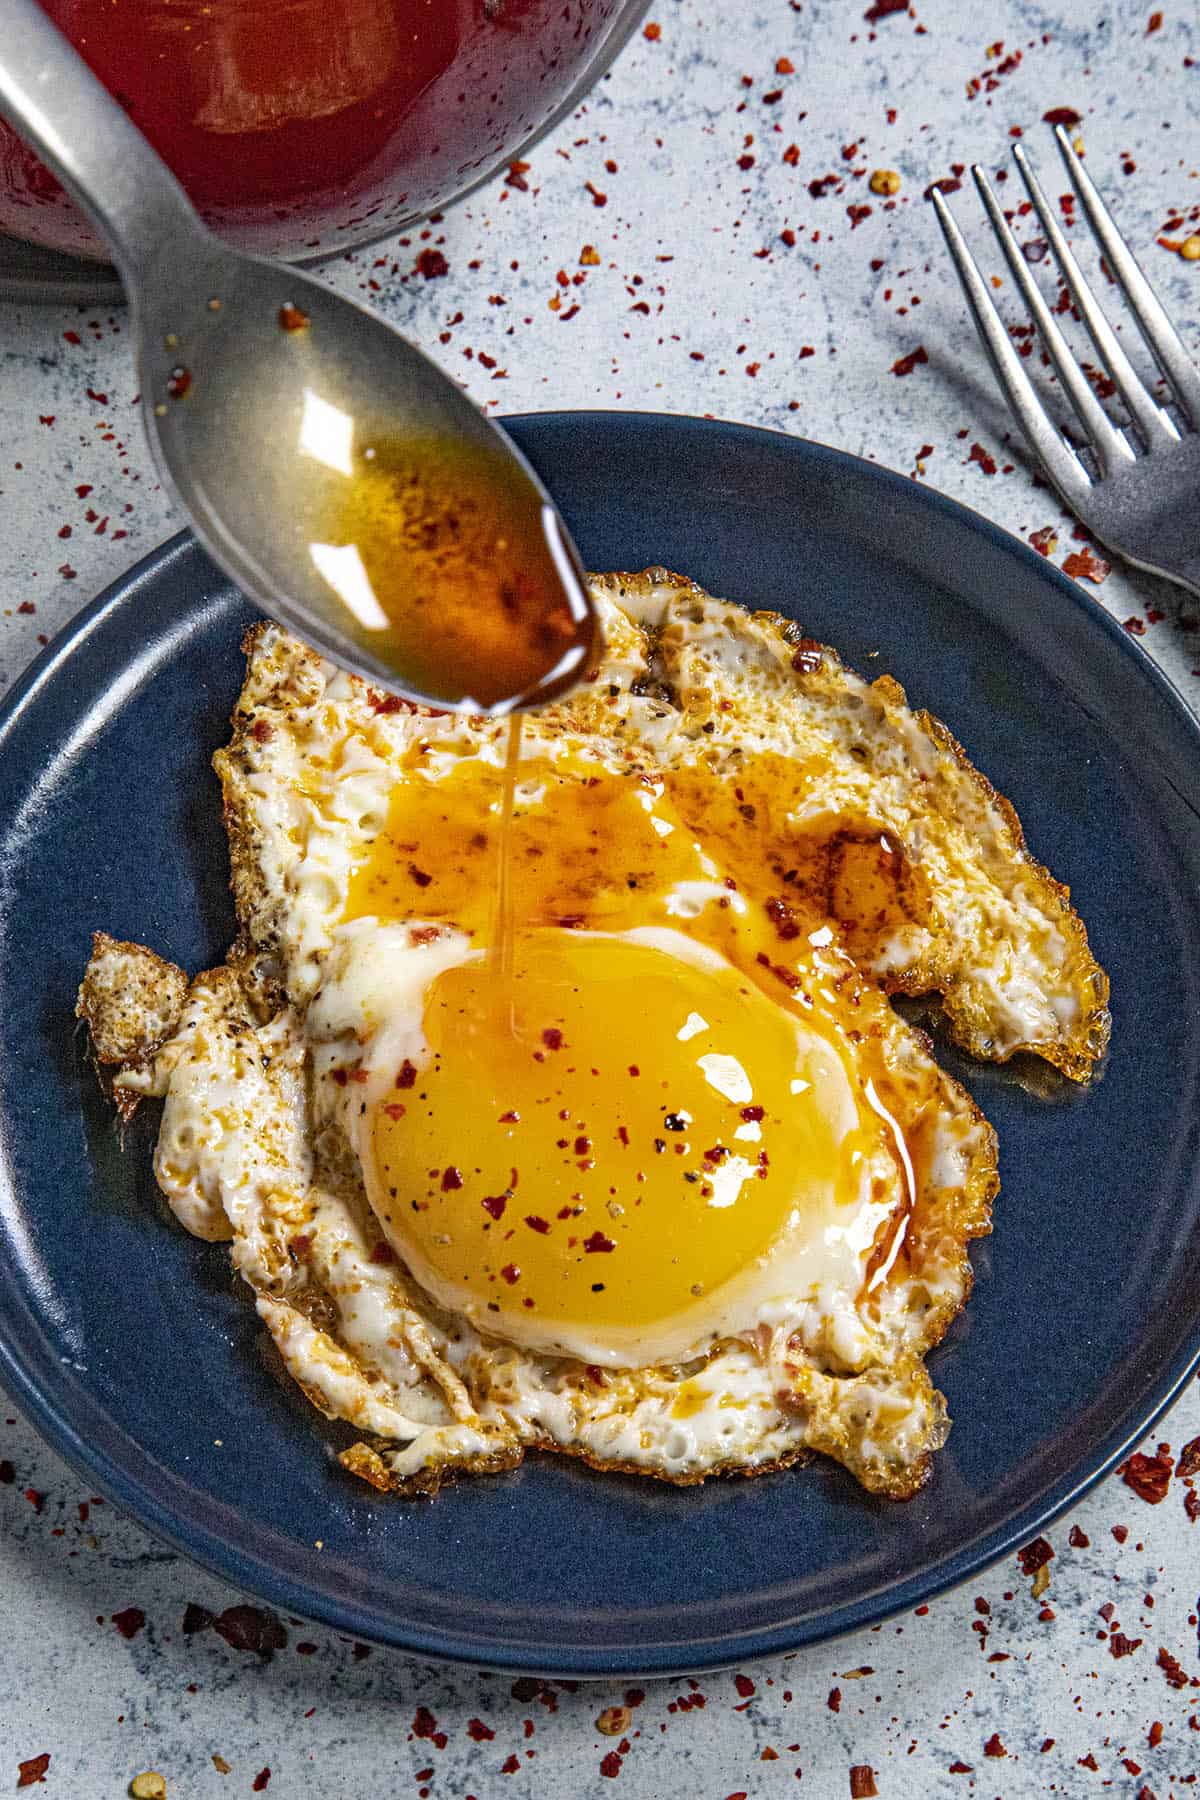 Drizzling homemade chili oil over a fried egg